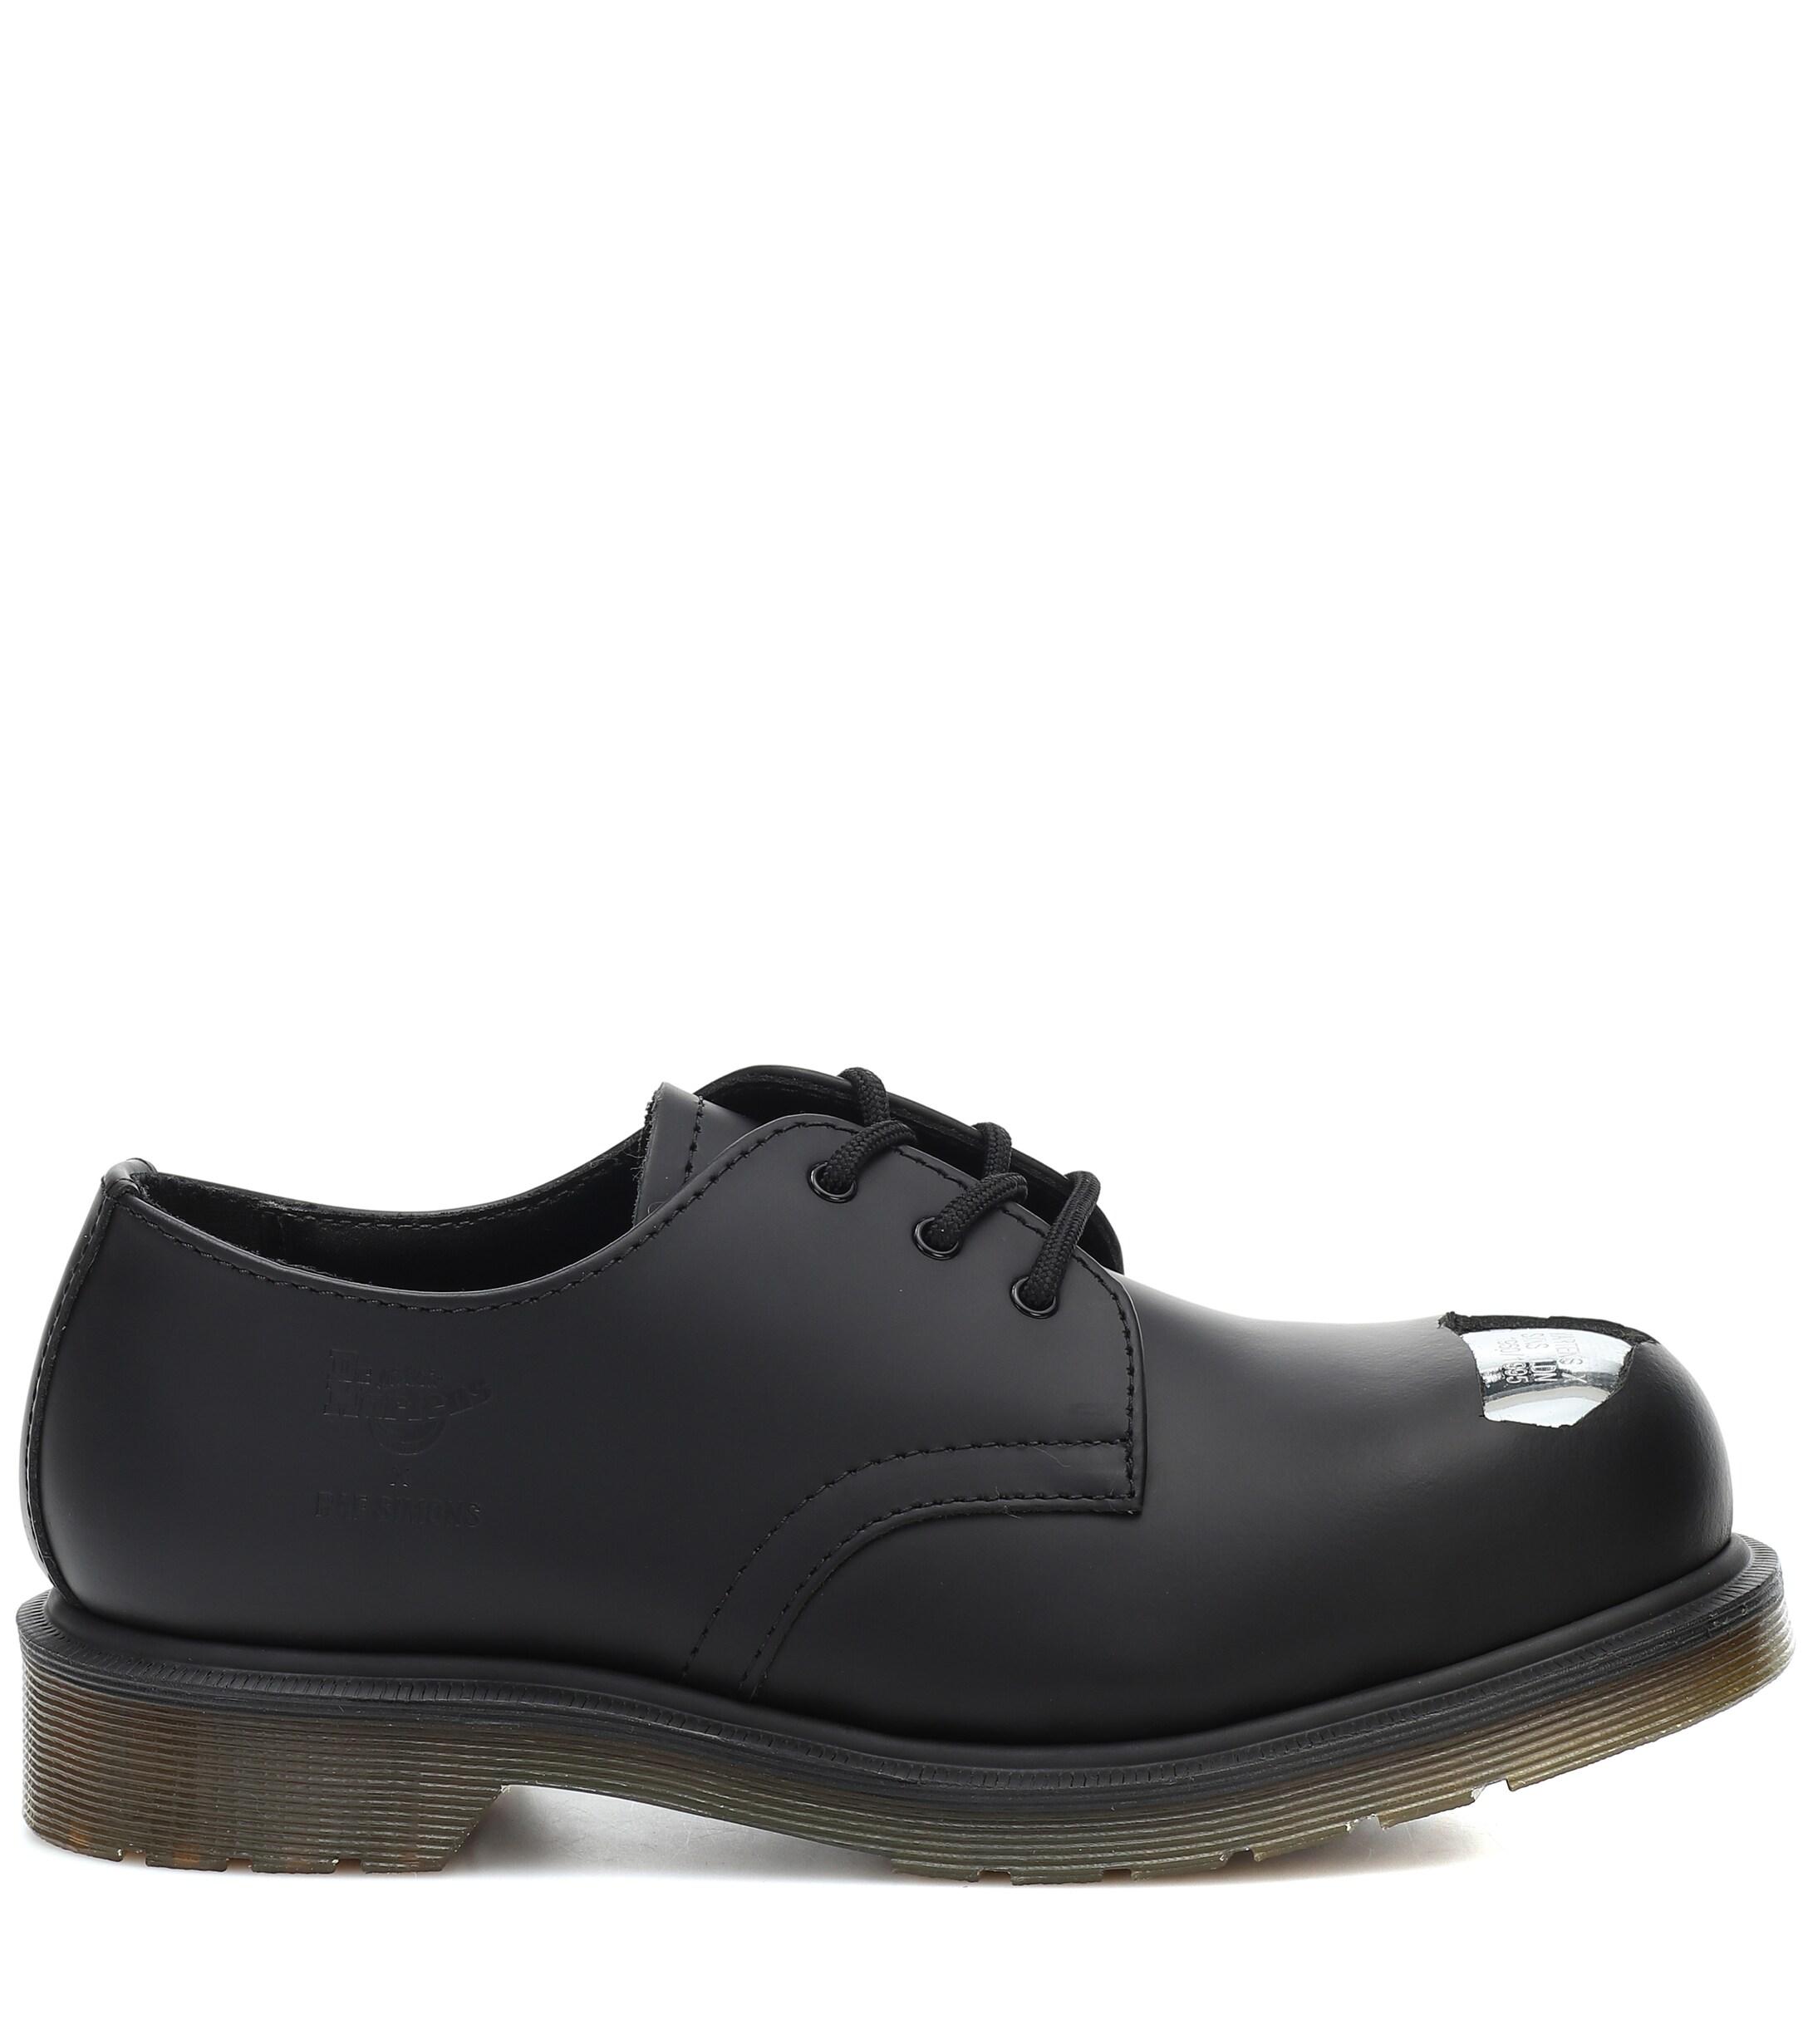 value on the other hand, Bachelor Raf Simons X Dr. Martens Leather Derby Shoes in Black | Lyst